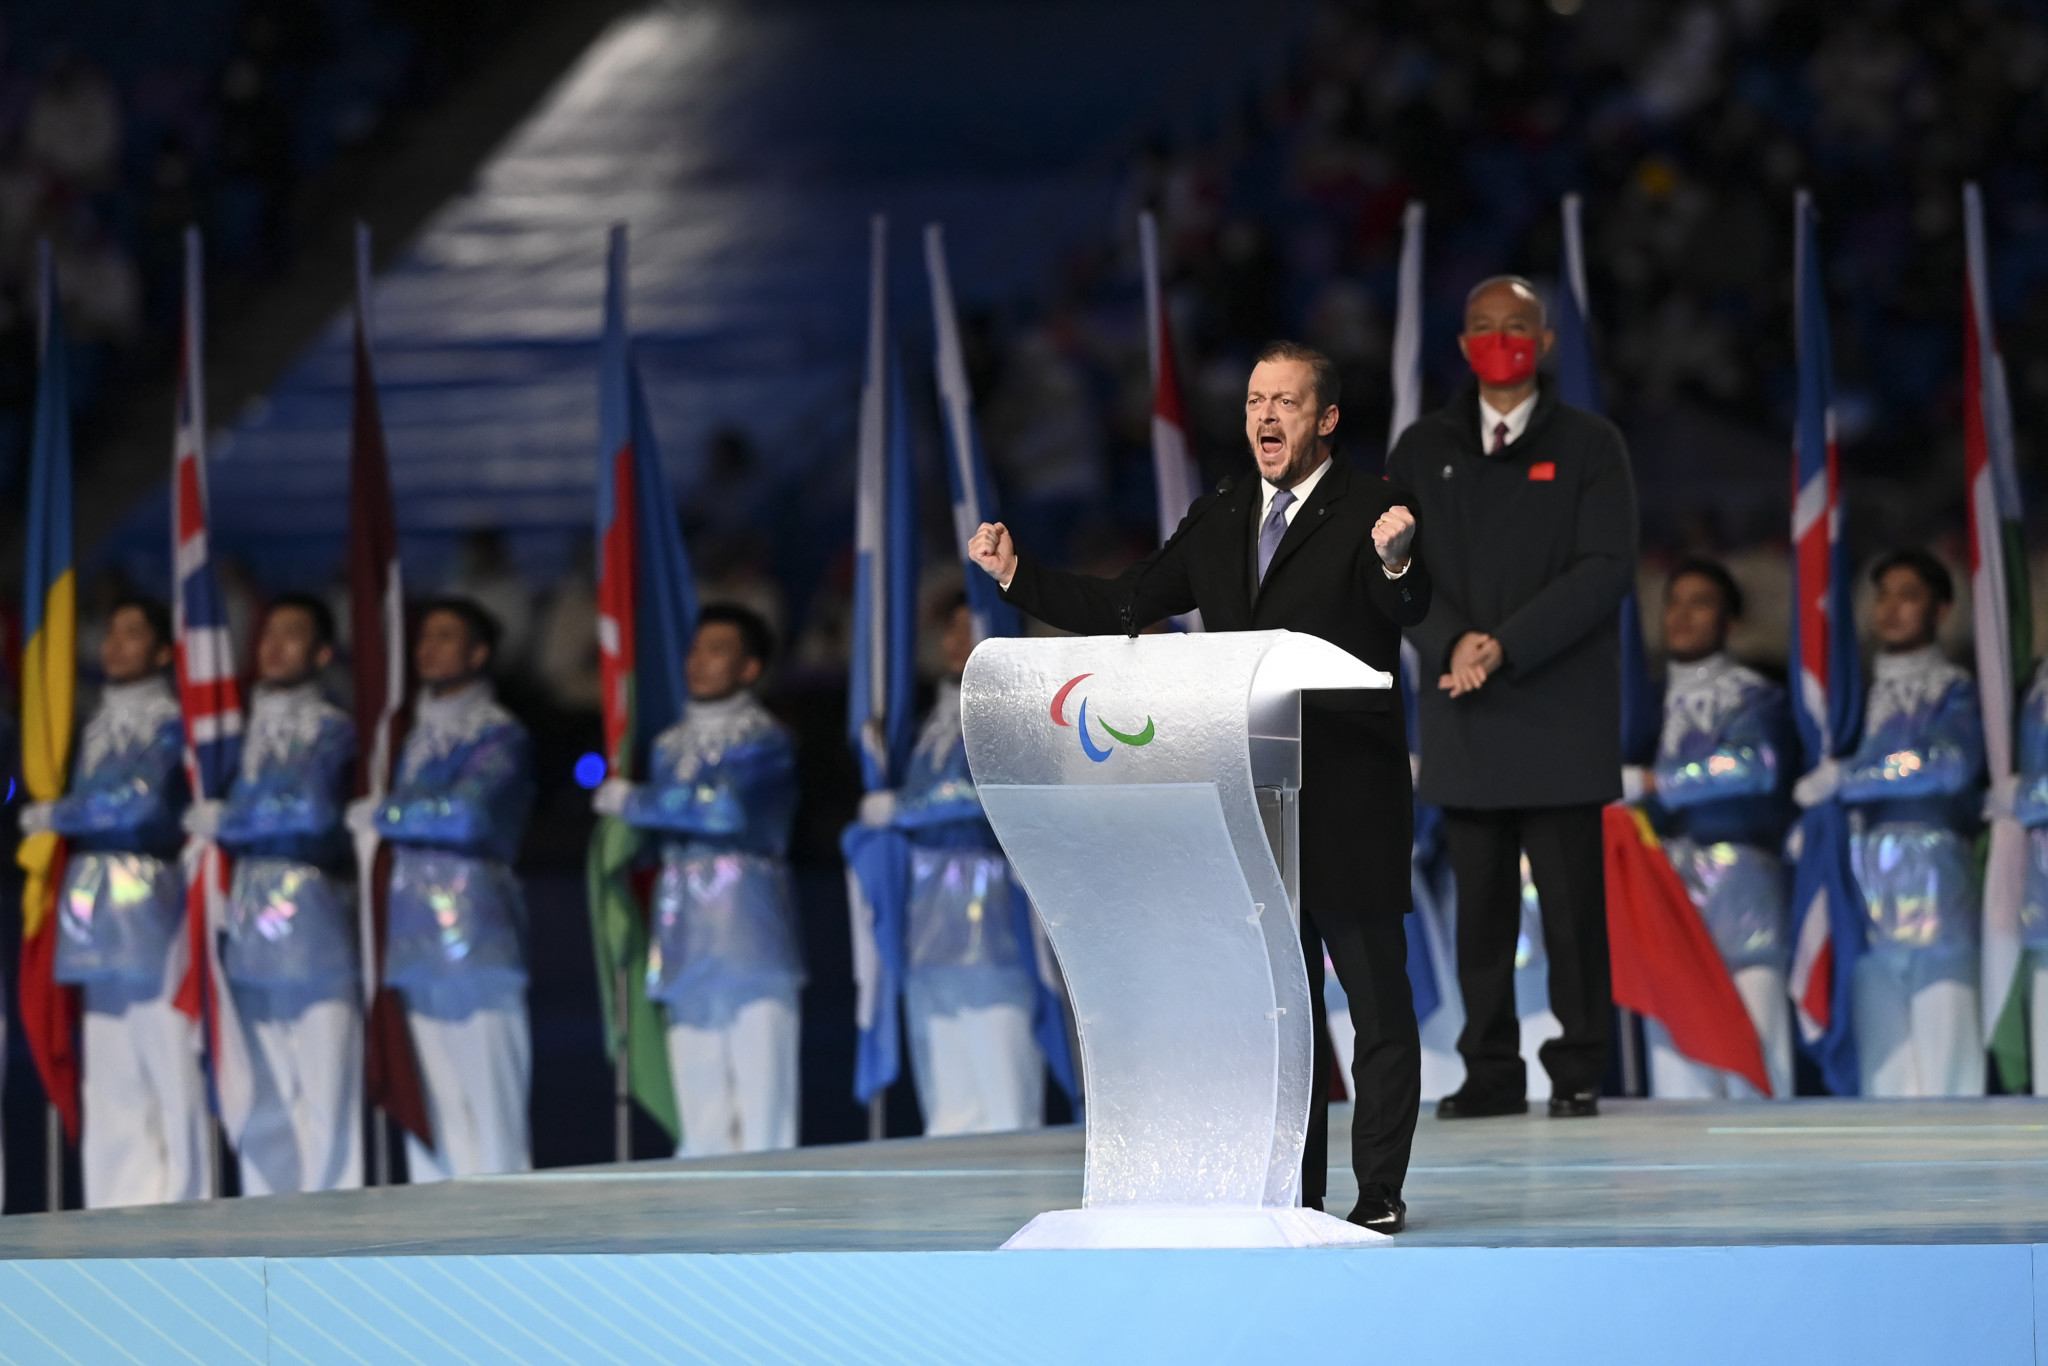 IPC President Andrew Parsons insisted Russian and Belarusian athletes were 